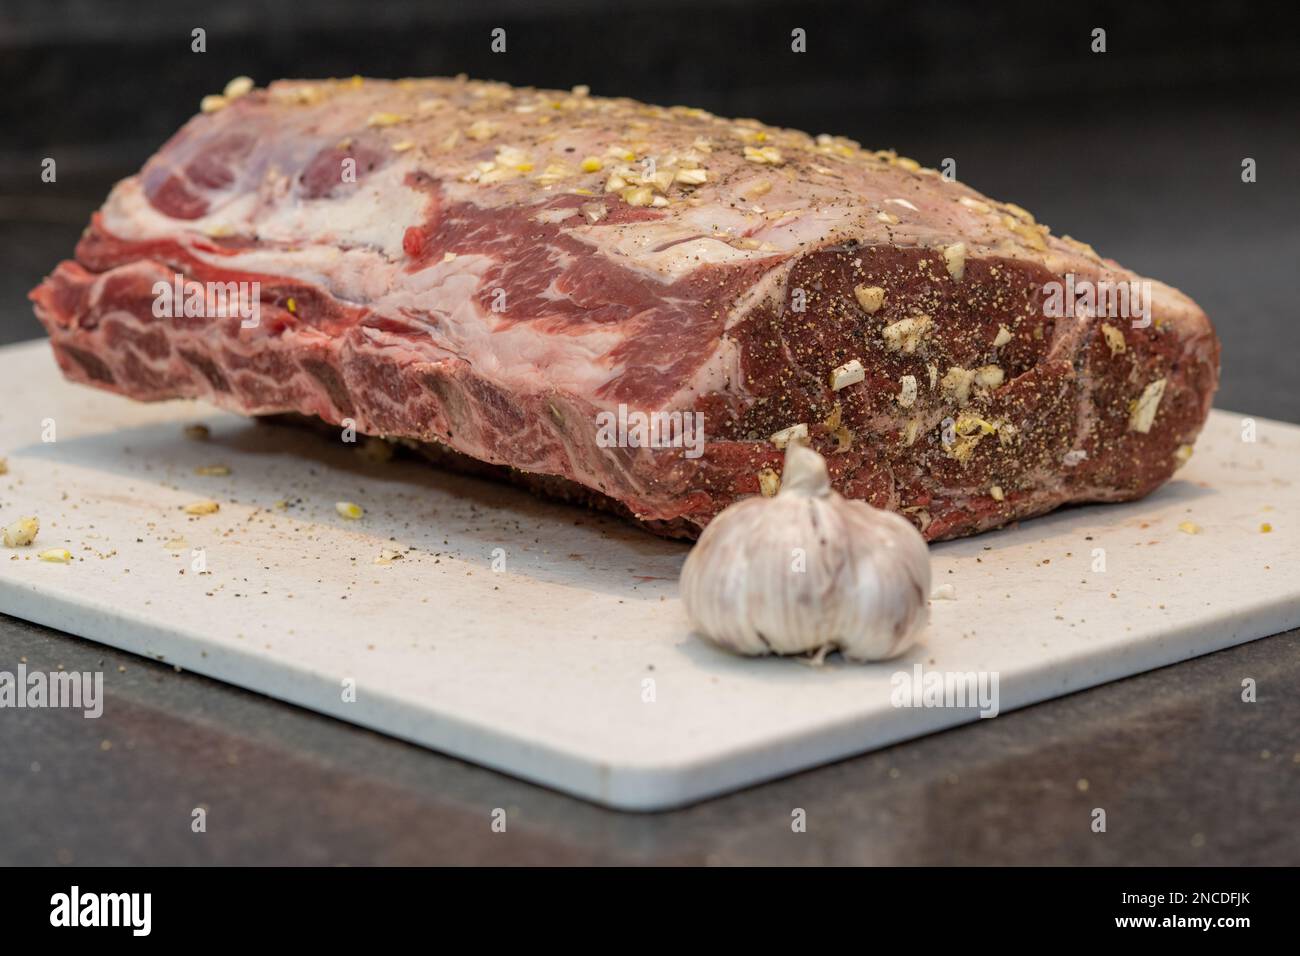 A large rack of raw beef prime rib on a white industrial plastic cutting board. The meat is sitting on the kitchen counter next to a  bulb of garlic. Stock Photo